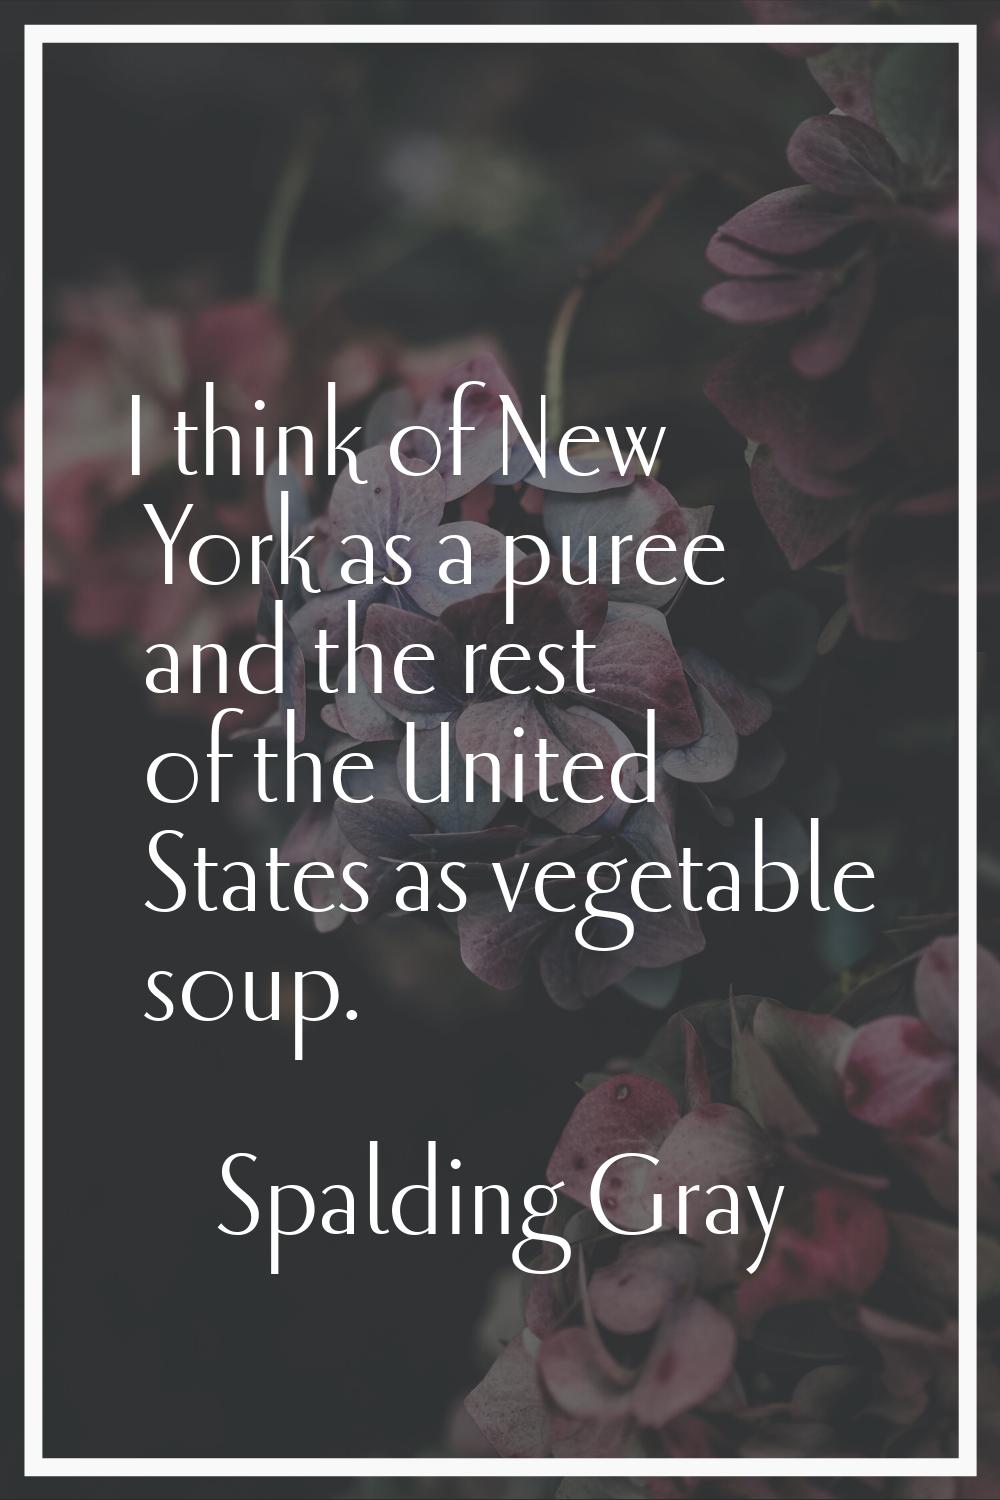 I think of New York as a puree and the rest of the United States as vegetable soup.